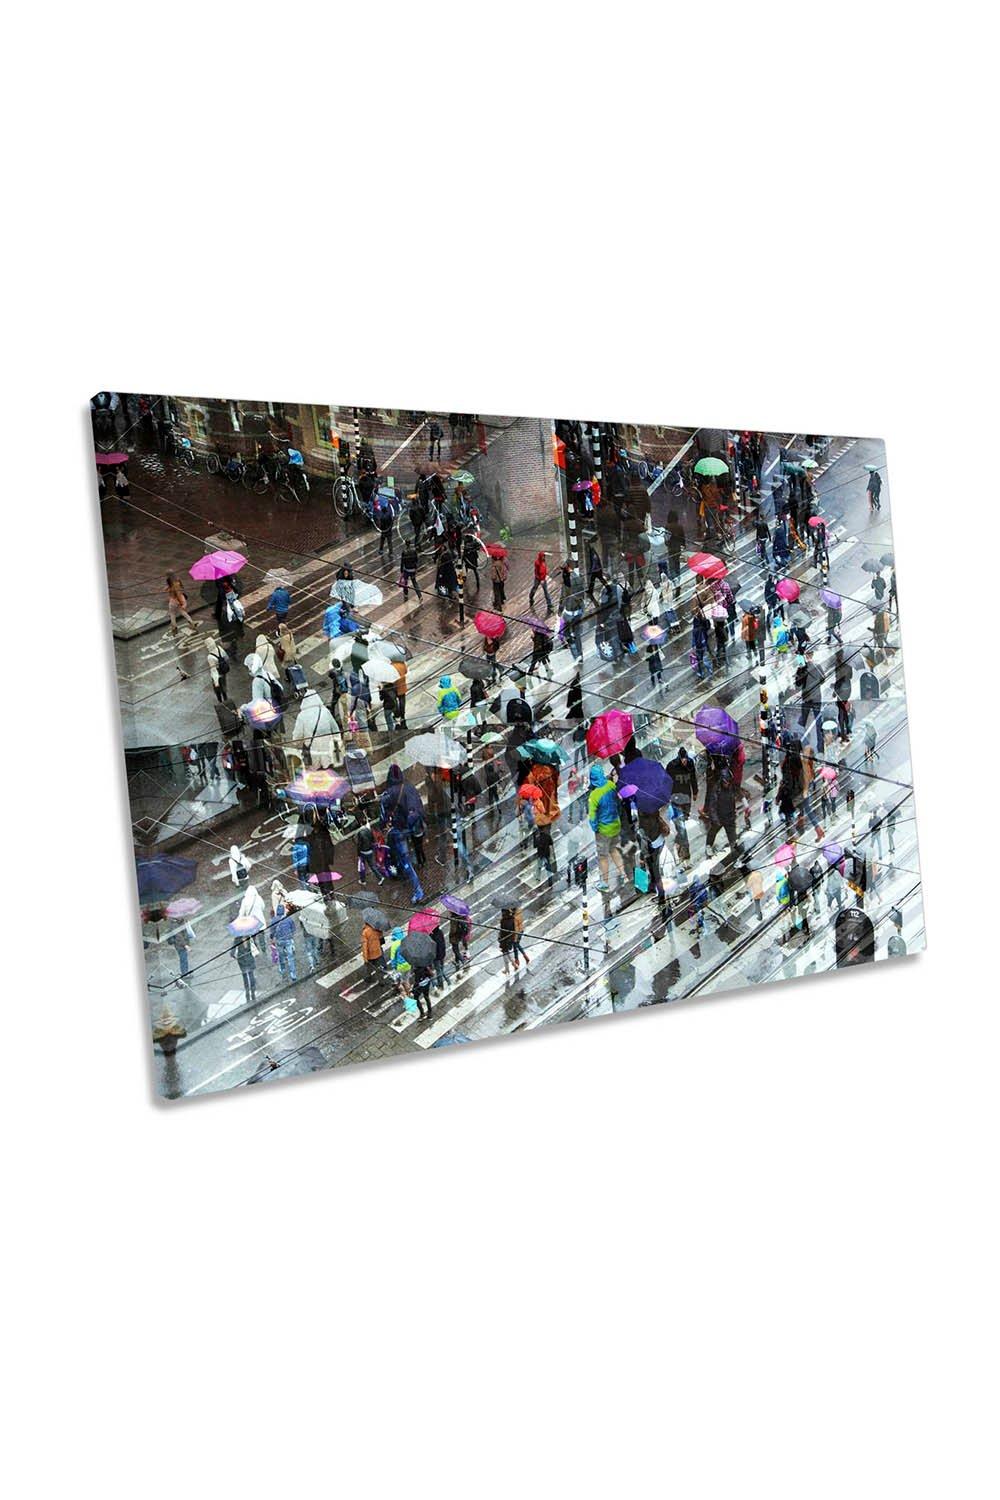 Amsterdam City Streets Canvas Wall Art Picture Print